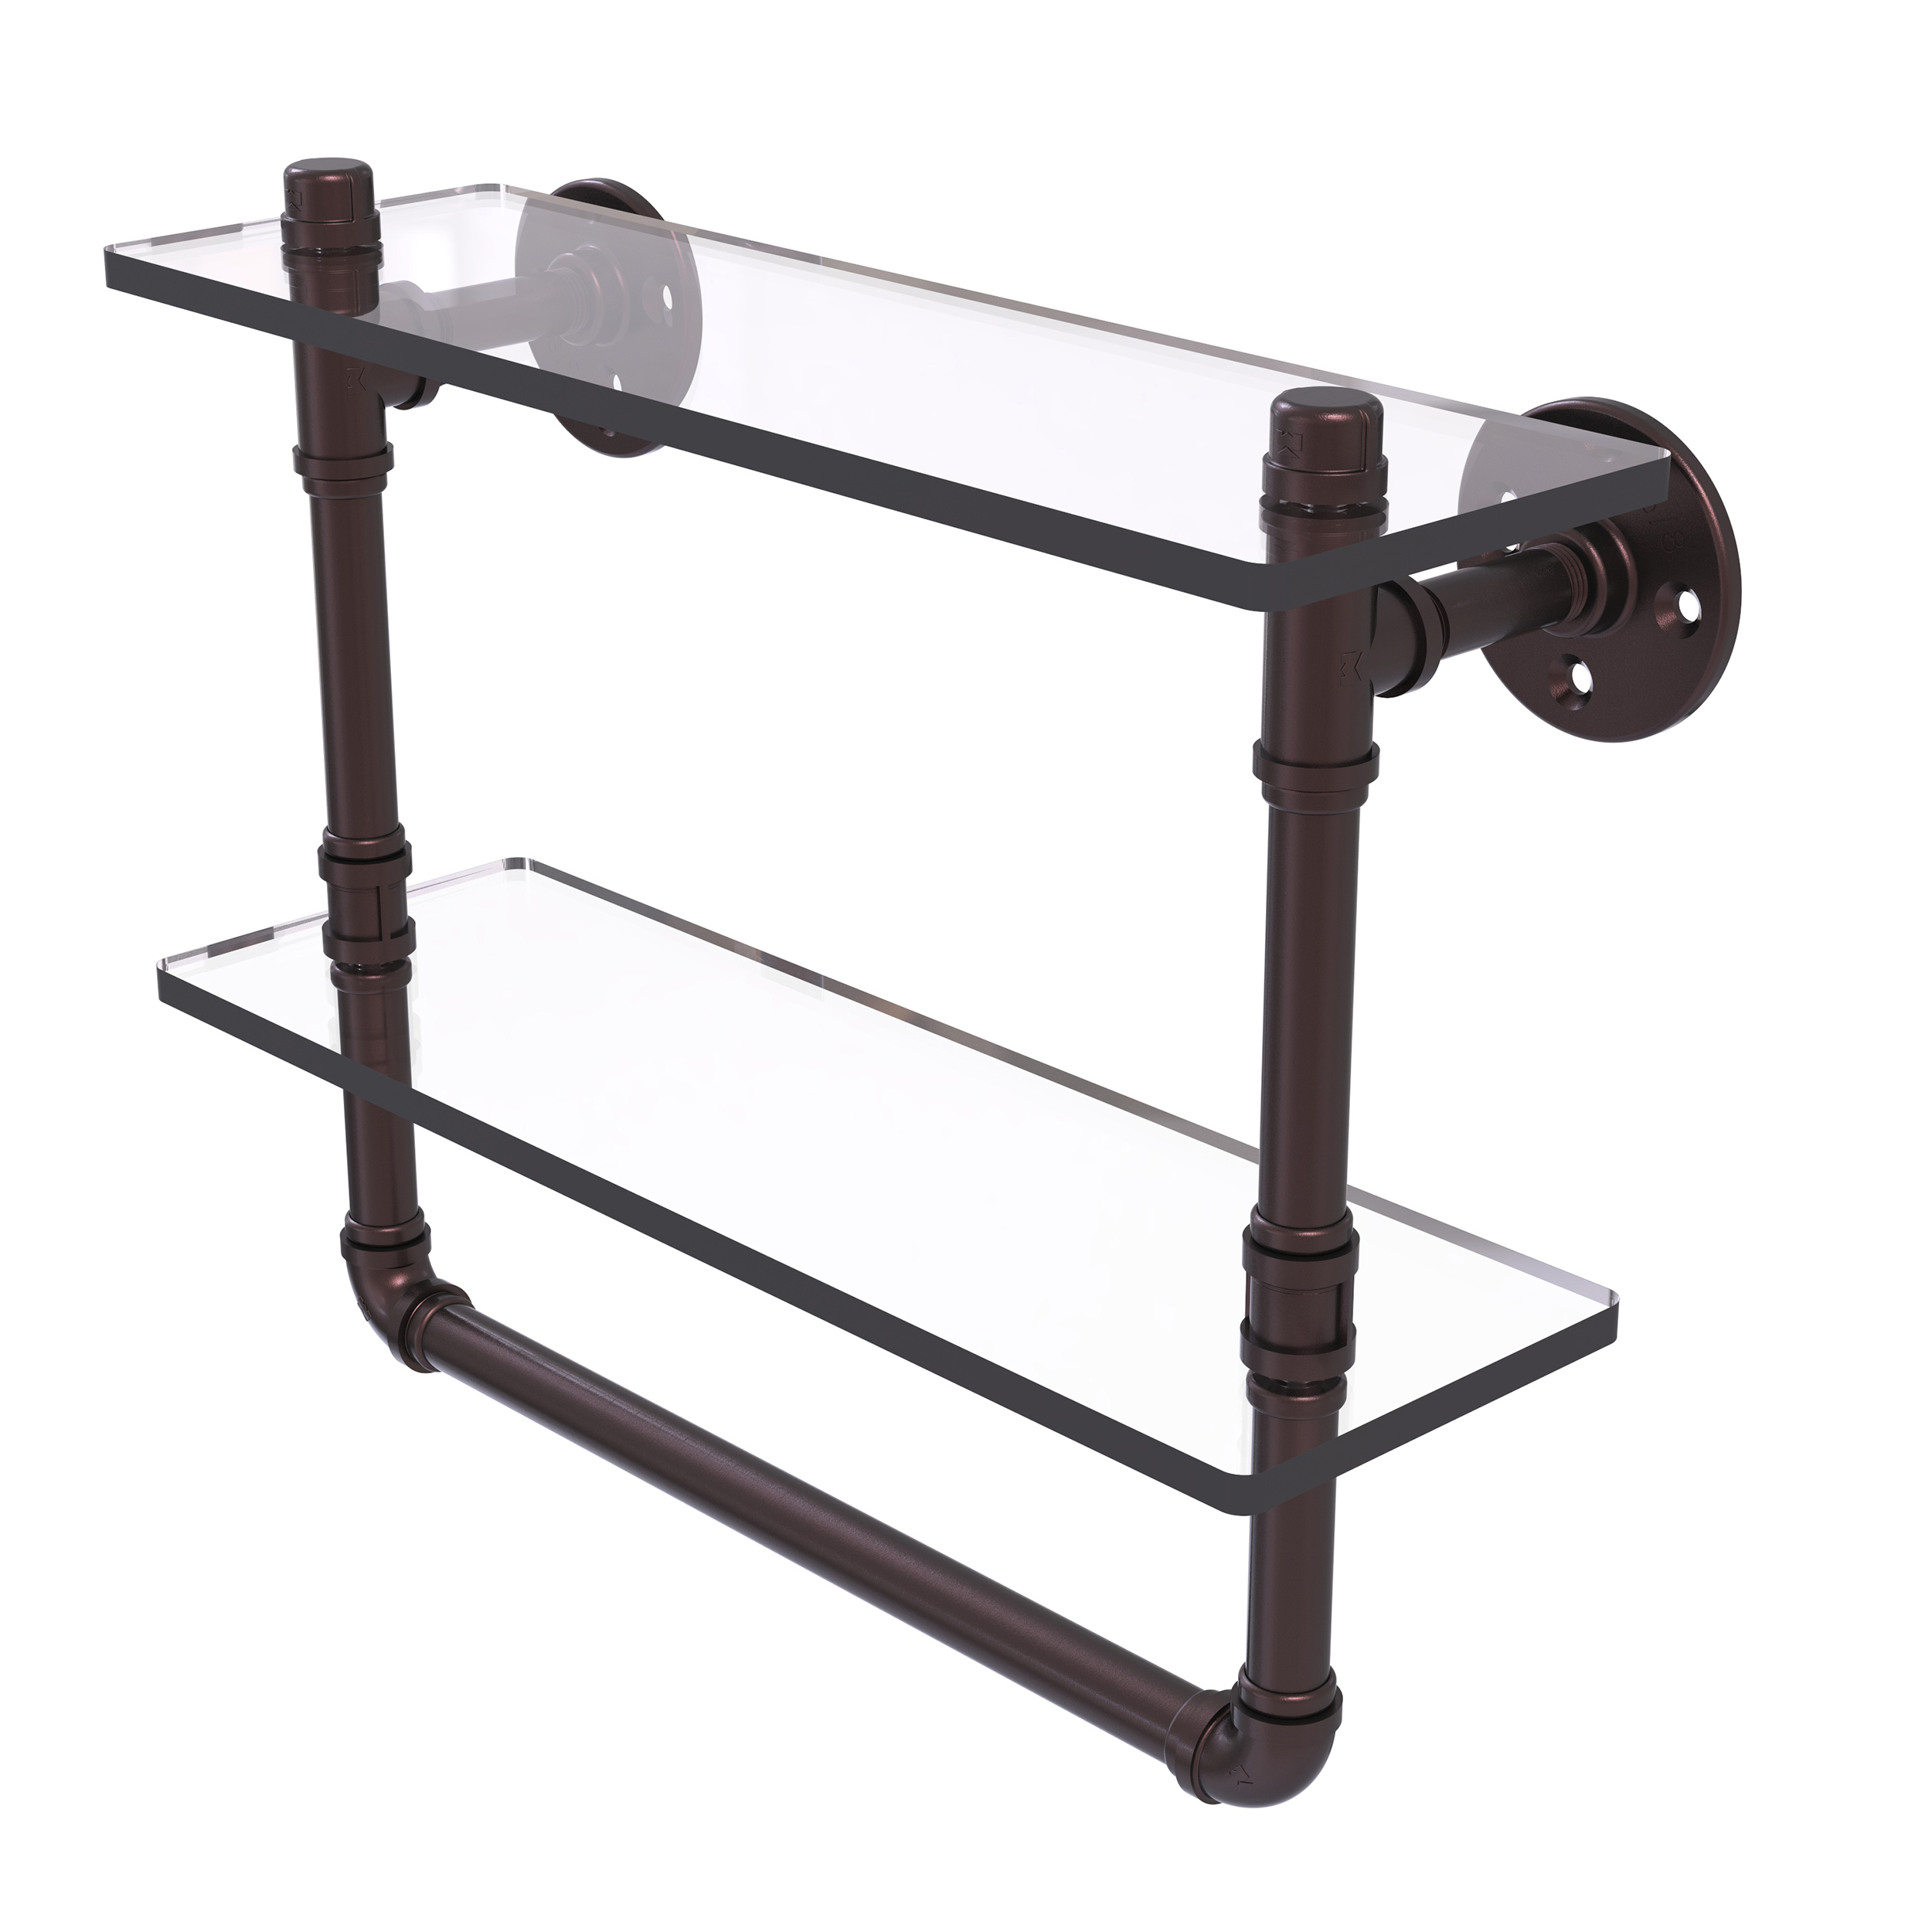 16" Double Glass Shelf With Towel Bar, Antique Bronze Finish